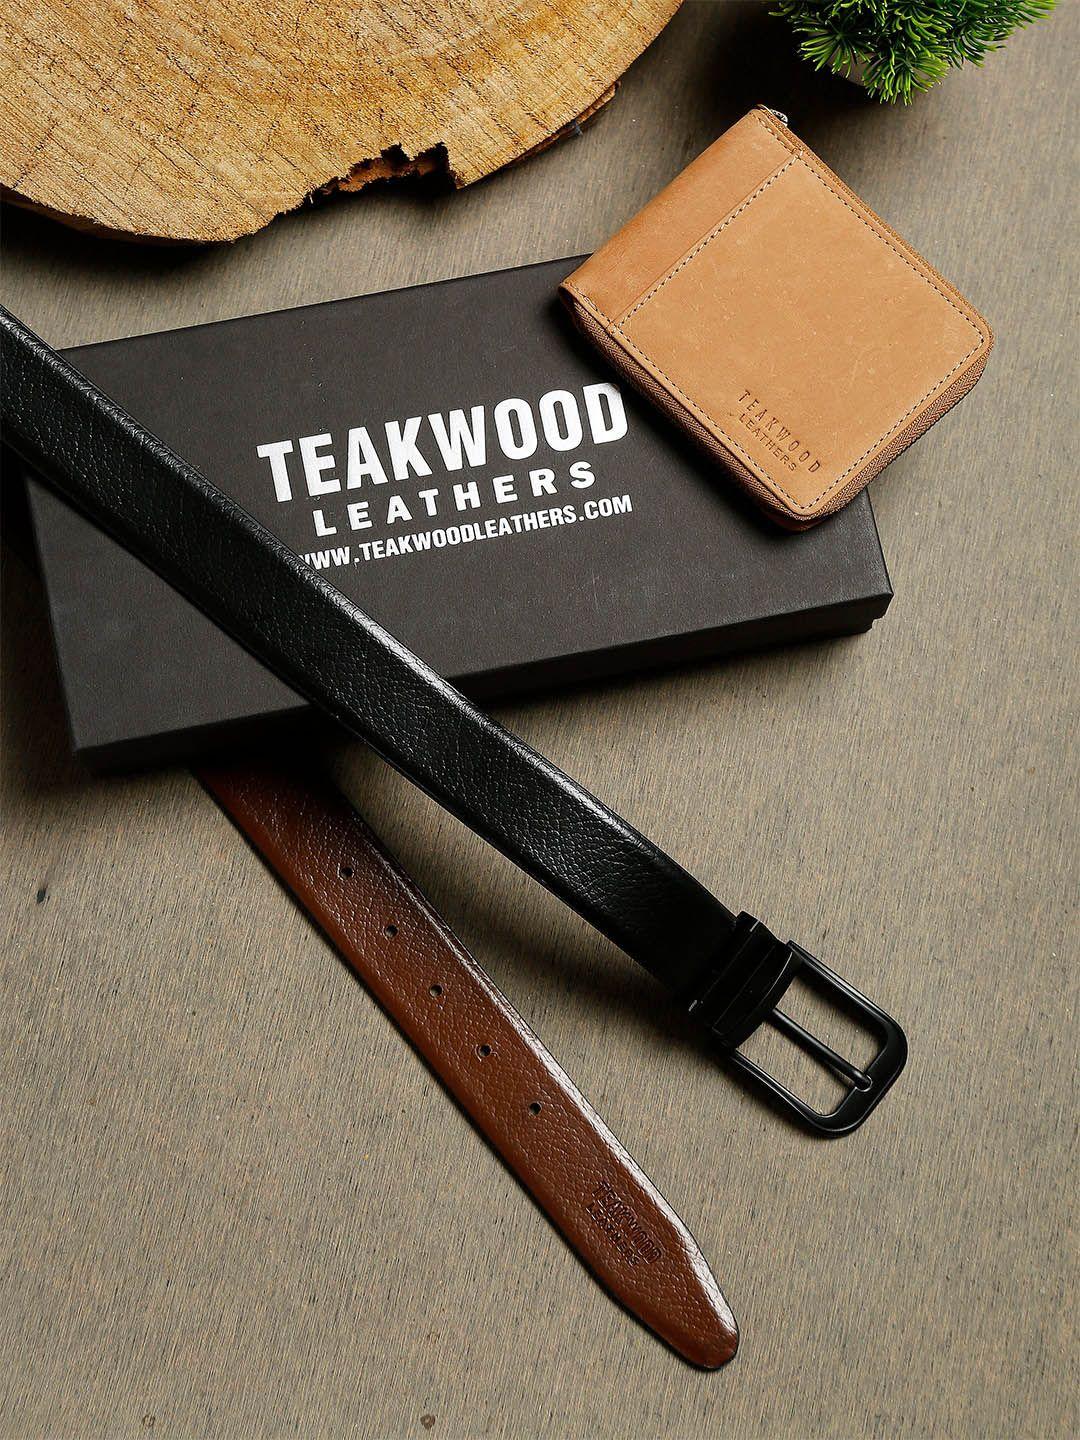 teakwood leathers men tan brown leather accessory gift set